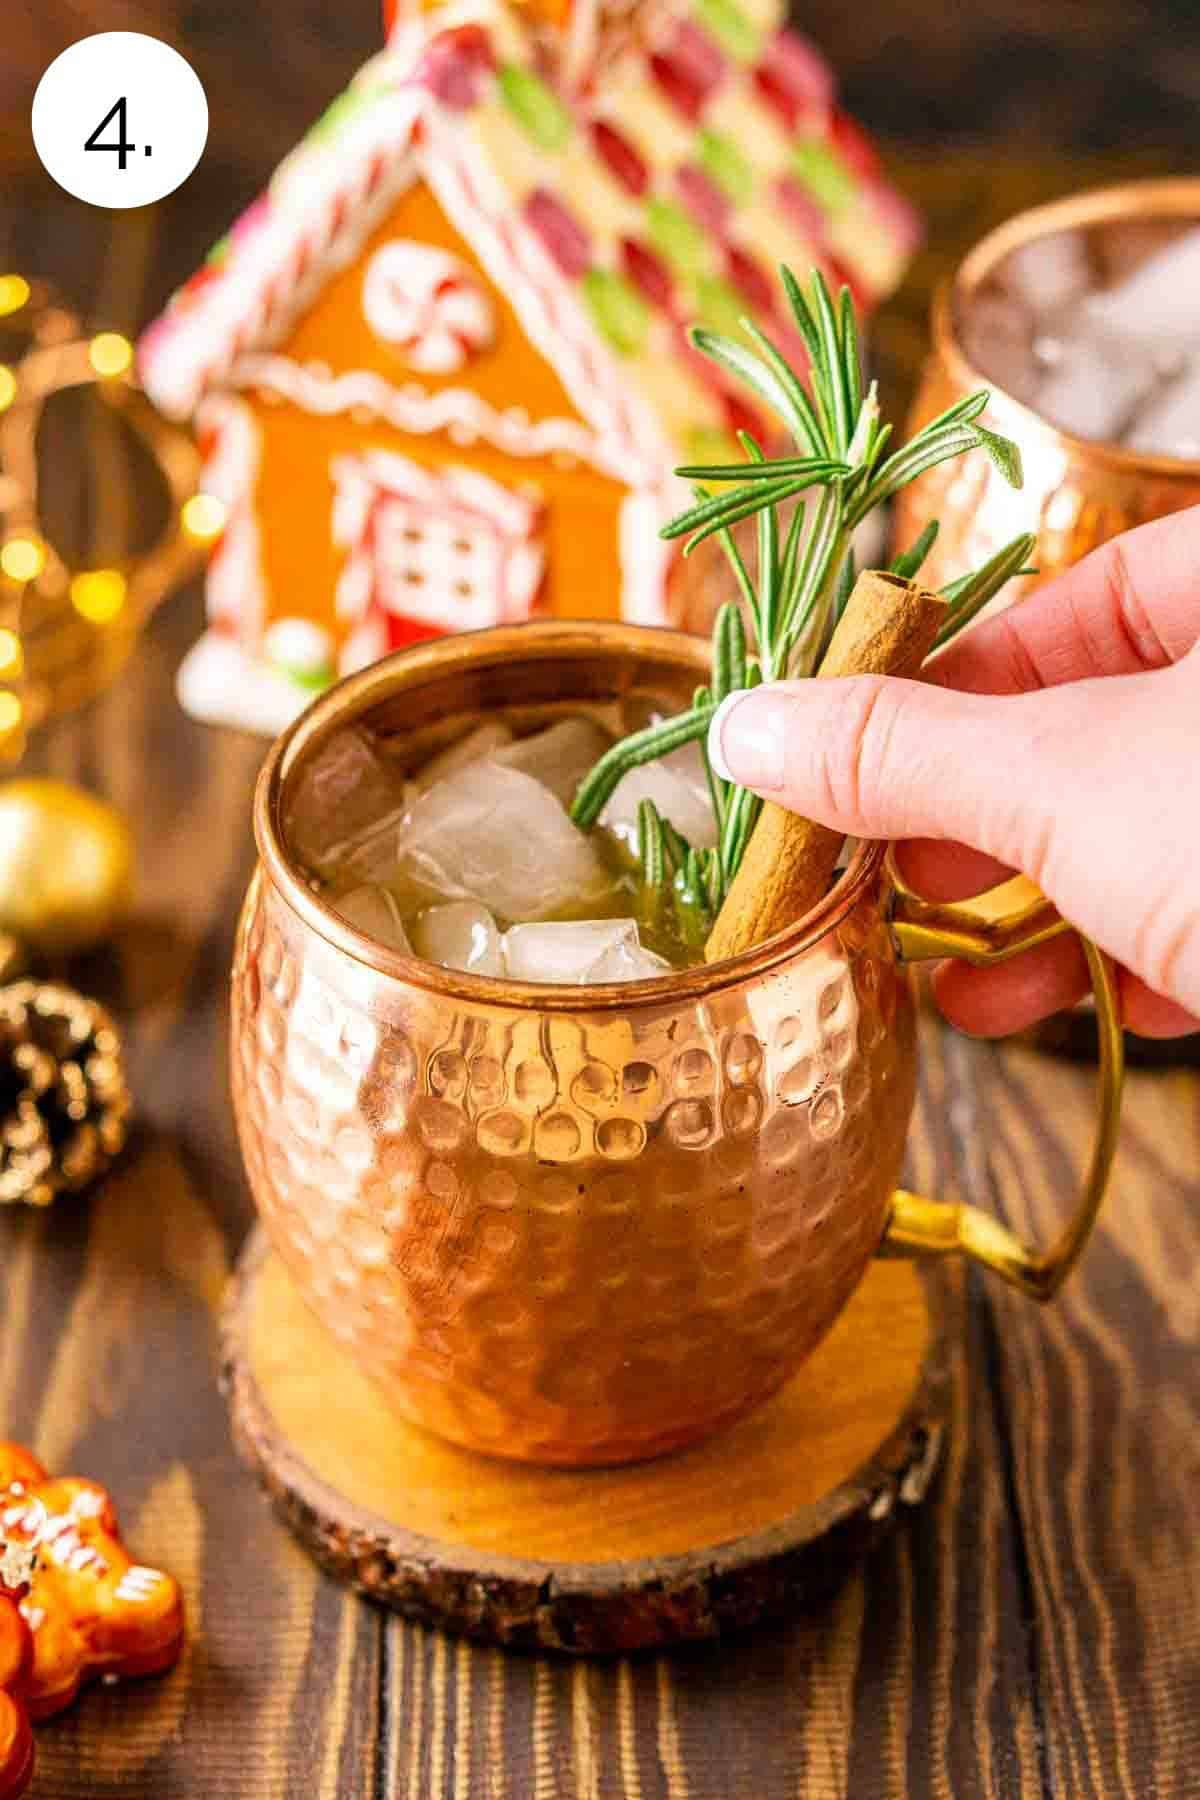 A hand adding a cinnamon stick and rosemary sprig to the copper mug as a garnish.